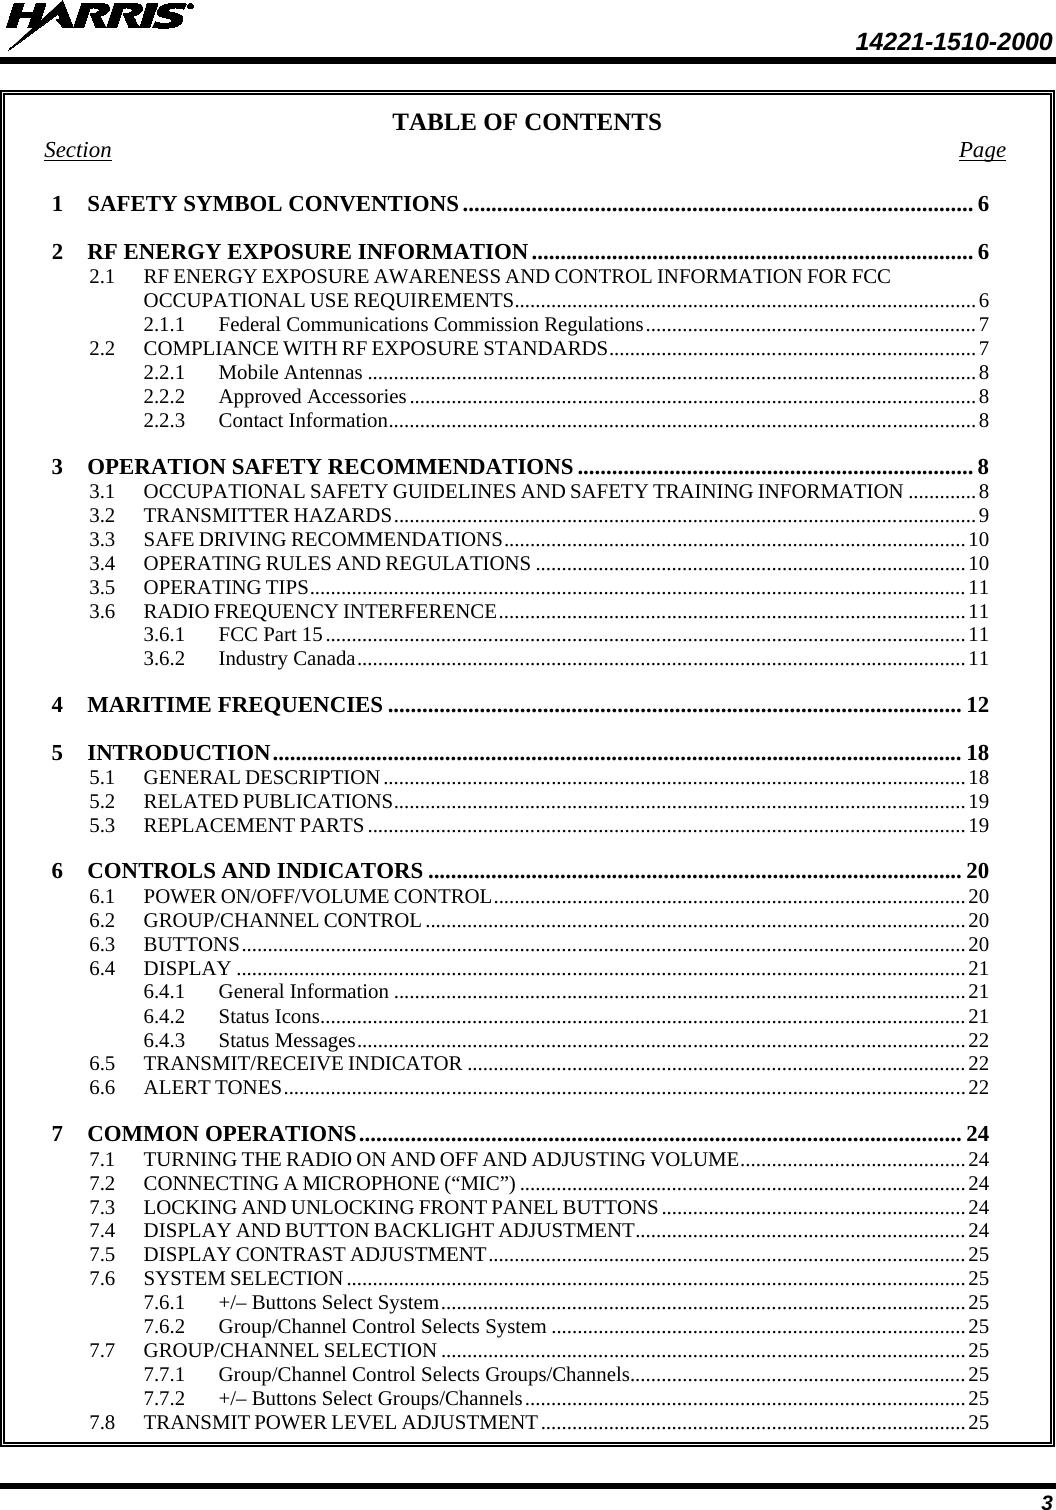  14221-1510-2000 3 TABLE OF CONTENTS Section Page 1 SAFETY SYMBOL CONVENTIONS ......................................................................................... 6 2 RF ENERGY EXPOSURE INFORMATION ............................................................................. 6 2.1 RF ENERGY EXPOSURE AWARENESS AND CONTROL INFORMATION FOR FCC OCCUPATIONAL USE REQUIREMENTS ........................................................................................ 6 2.1.1 Federal Communications Commission Regulations ............................................................... 7 2.2 COMPLIANCE WITH RF EXPOSURE STANDARDS ...................................................................... 7 2.2.1 Mobile Antennas .................................................................................................................... 8 2.2.2 Approved Accessories ............................................................................................................ 8 2.2.3 Contact Information ................................................................................................................ 8 3 OPERATION SAFETY RECOMMENDATIONS ..................................................................... 8 3.1 OCCUPATIONAL SAFETY GUIDELINES AND SAFETY TRAINING INFORMATION ............. 8 3.2 TRANSMITTER HAZARDS ............................................................................................................... 9 3.3 SAFE DRIVING RECOMMENDATIONS ........................................................................................ 10 3.4 OPERATING RULES AND REGULATIONS .................................................................................. 10 3.5 OPERATING TIPS ............................................................................................................................. 11 3.6 RADIO FREQUENCY INTERFERENCE ......................................................................................... 11 3.6.1 FCC Part 15 .......................................................................................................................... 11 3.6.2 Industry Canada .................................................................................................................... 11 4 MARITIME FREQUENCIES .................................................................................................... 12 5 INTRODUCTION ........................................................................................................................ 18 5.1 GENERAL DESCRIPTION ............................................................................................................... 18 5.2 RELATED PUBLICATIONS ............................................................................................................. 19 5.3 REPLACEMENT PARTS .................................................................................................................. 19 6 CONTROLS AND INDICATORS ............................................................................................. 20 6.1 POWER ON/OFF/VOLUME CONTROL .......................................................................................... 20 6.2 GROUP/CHANNEL CONTROL ....................................................................................................... 20 6.3 BUTTONS .......................................................................................................................................... 20 6.4 DISPLAY ........................................................................................................................................... 21 6.4.1 General Information ............................................................................................................. 21 6.4.2 Status Icons ........................................................................................................................... 21 6.4.3 Status Messages .................................................................................................................... 22 6.5 TRANSMIT/RECEIVE INDICATOR ............................................................................................... 22 6.6 ALERT TONES .................................................................................................................................. 22 7 COMMON OPERATIONS ......................................................................................................... 24 7.1 TURNING THE RADIO ON AND OFF AND ADJUSTING VOLUME ........................................... 24 7.2 CONNECTING A MICROPHONE (“MIC”) ..................................................................................... 24 7.3 LOCKING AND UNLOCKING FRONT PANEL BUTTONS .......................................................... 24 7.4 DISPLAY AND BUTTON BACKLIGHT ADJUSTMENT ............................................................... 24 7.5 DISPLAY CONTRAST ADJUSTMENT ........................................................................................... 25 7.6 SYSTEM SELECTION ...................................................................................................................... 25 7.6.1 +/– Buttons Select System .................................................................................................... 25 7.6.2 Group/Channel Control Selects System ............................................................................... 25 7.7 GROUP/CHANNEL SELECTION .................................................................................................... 25 7.7.1 Group/Channel Control Selects Groups/Channels................................................................ 25 7.7.2 +/– Buttons Select Groups/Channels .................................................................................... 25 7.8 TRANSMIT POWER LEVEL ADJUSTMENT ................................................................................. 25 